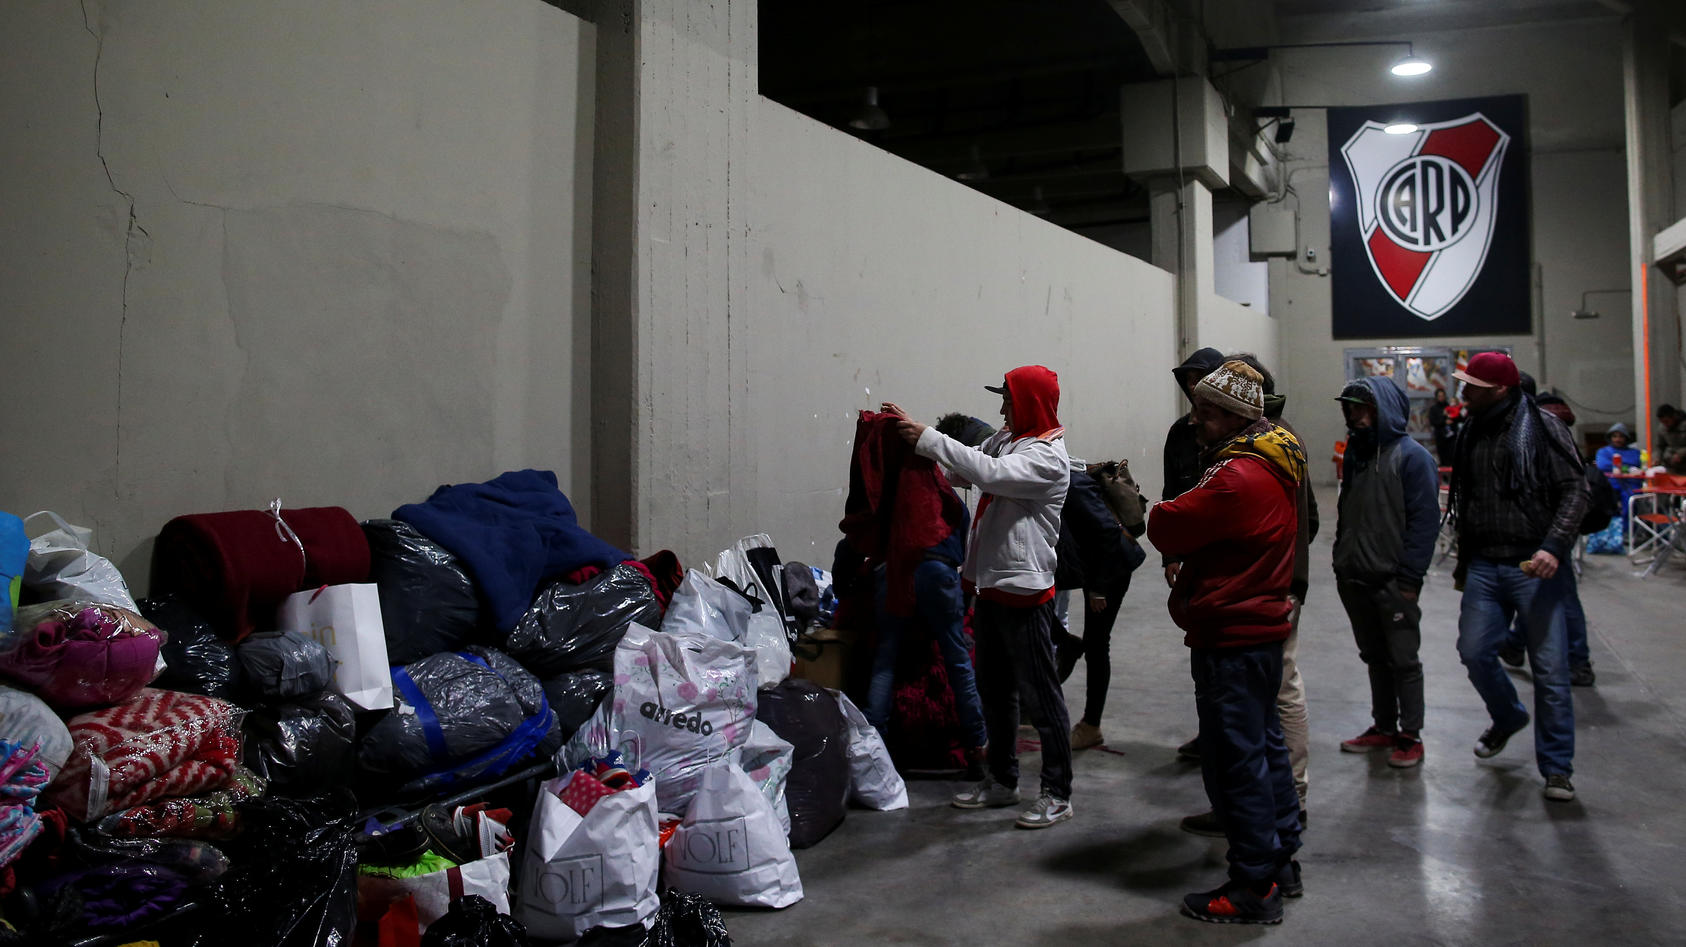 The homeless receive donations at River Plate stadium in Buenos Aires, Argentina July 3, 2019. REUTERS/Agustin Marcarian